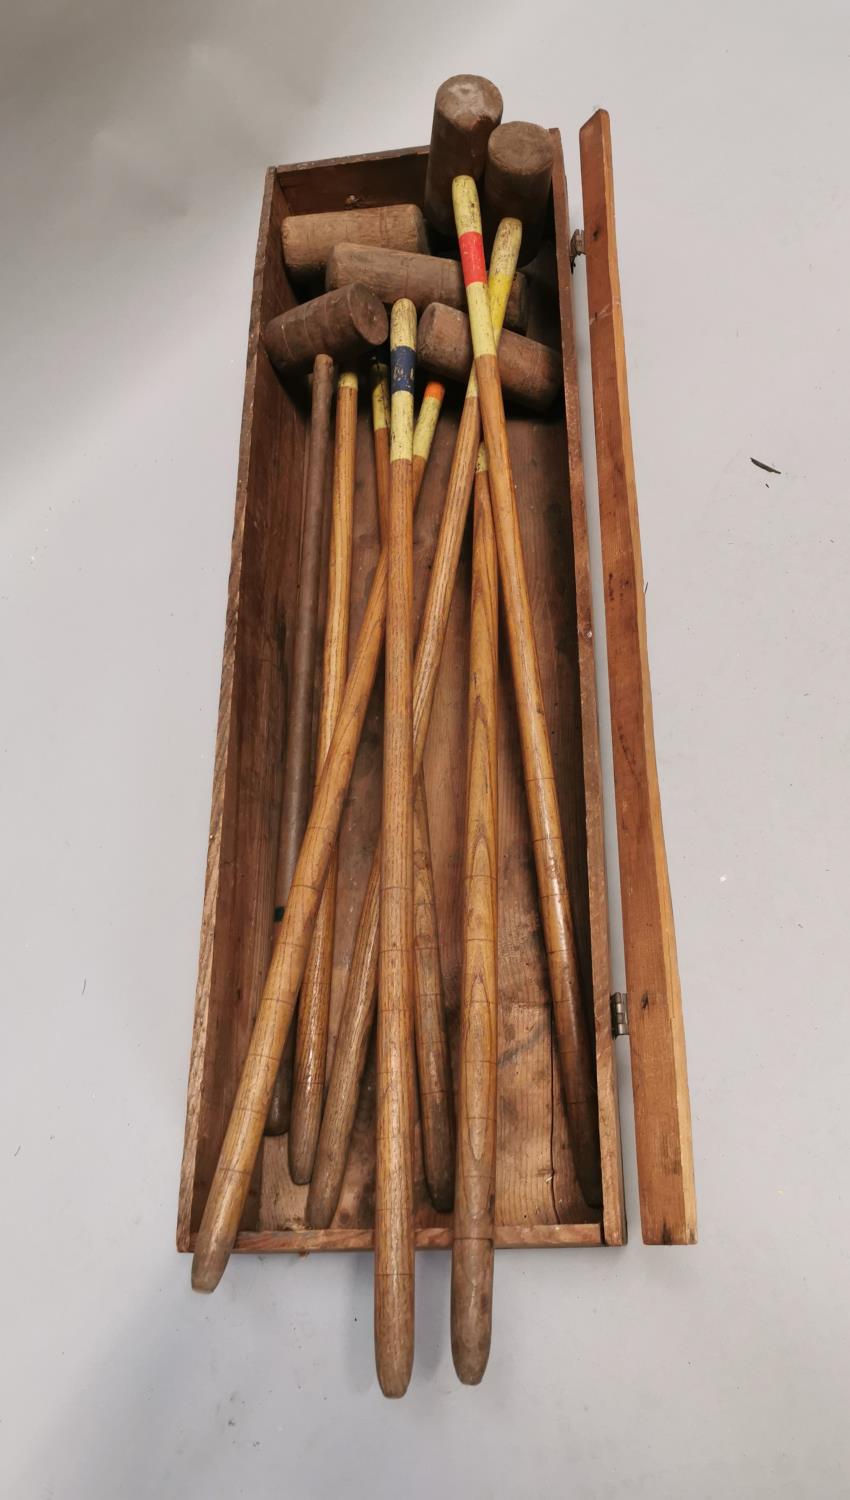 Early 20th. C. partial Croquet set. - Image 2 of 3